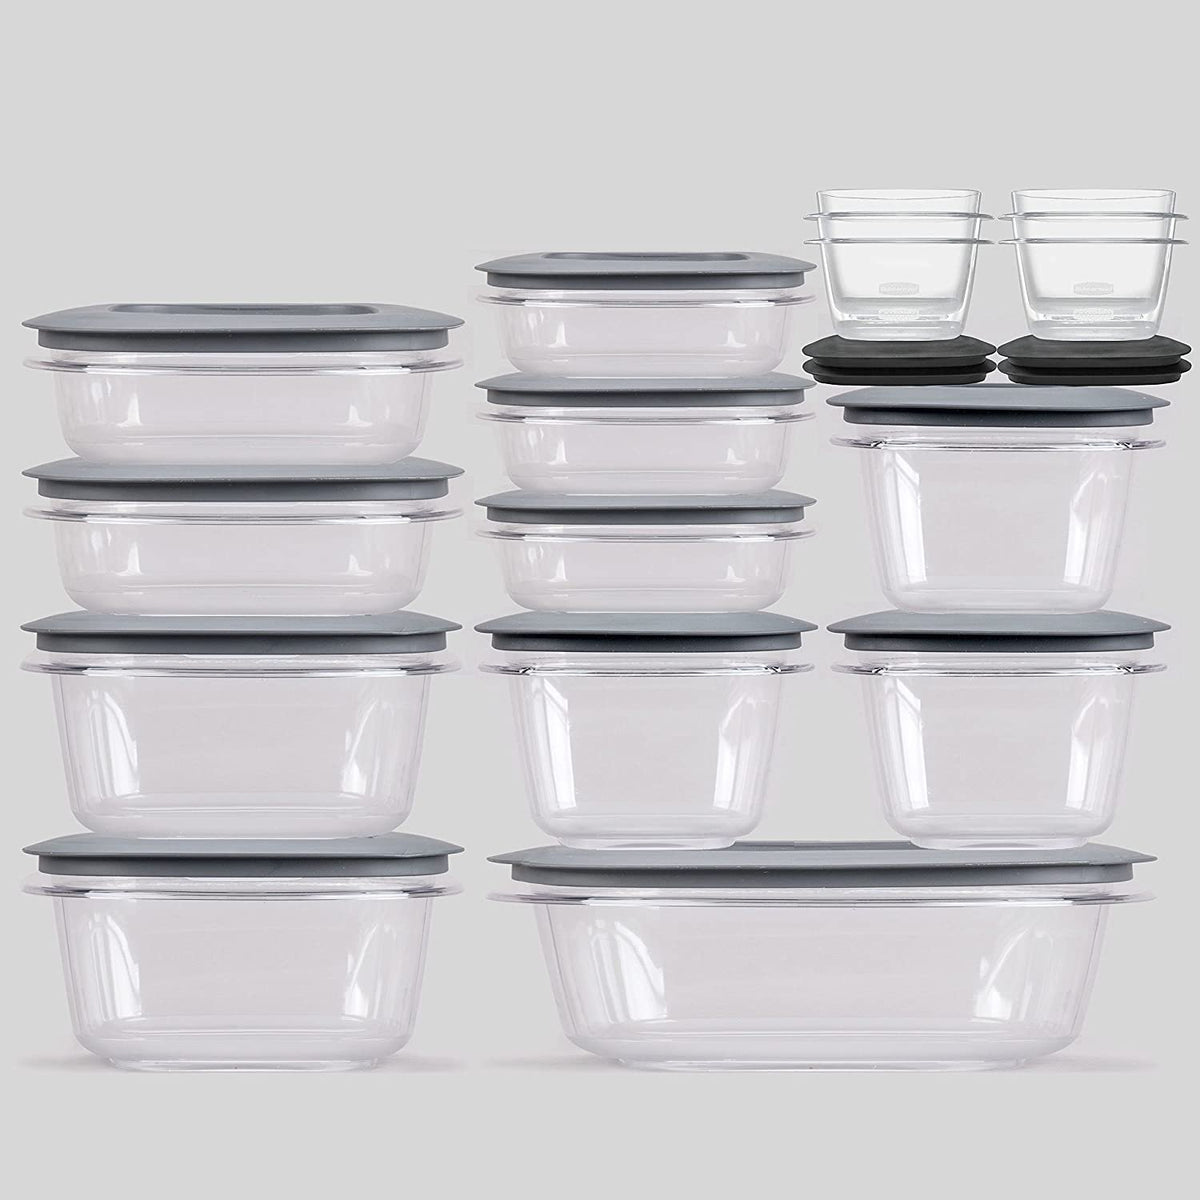 Rubbermaid Premier Container + Lid, 9 Cups, Plastic Containers